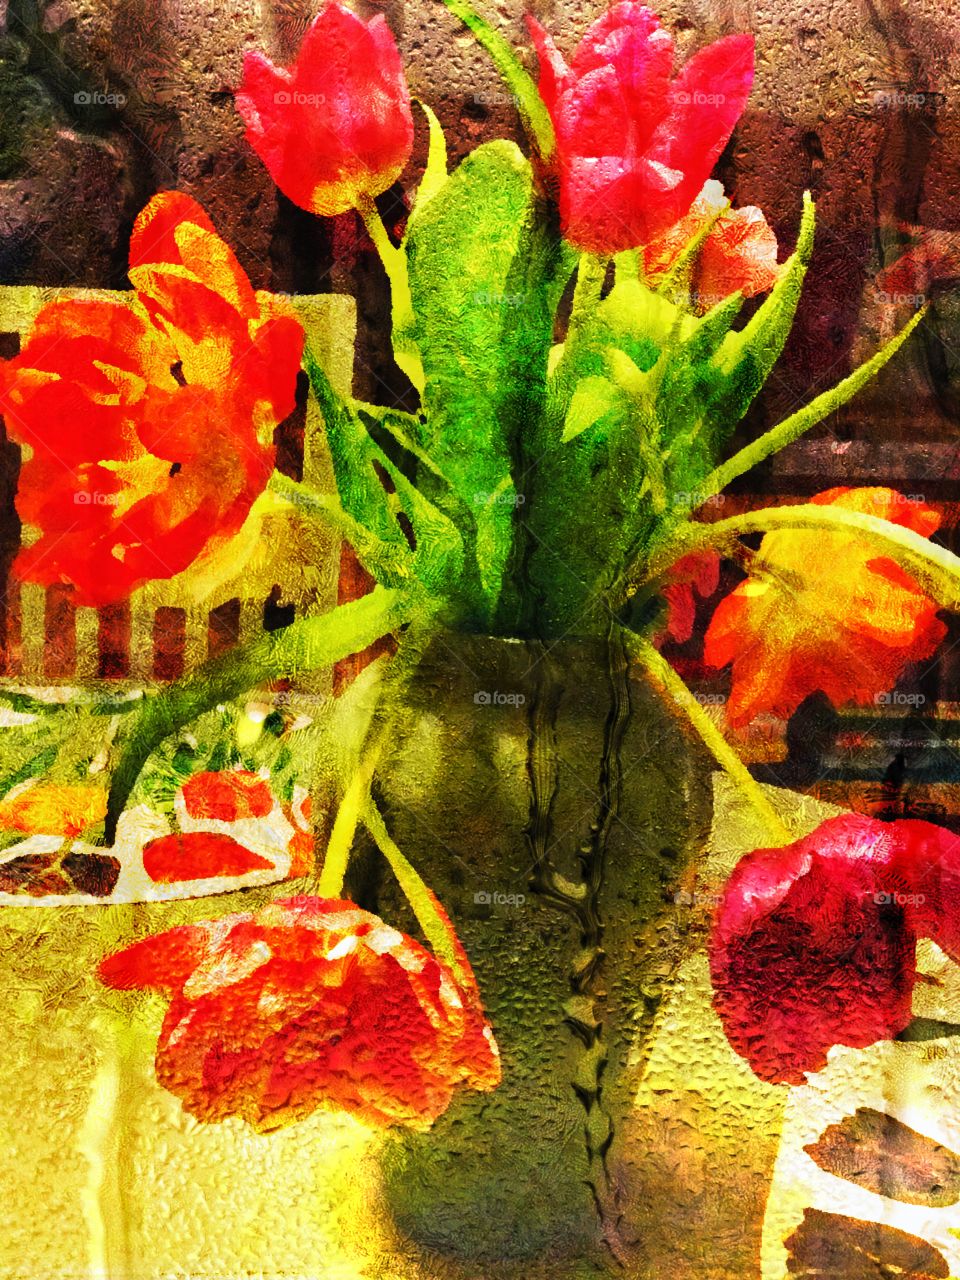 Tulips in a vase
